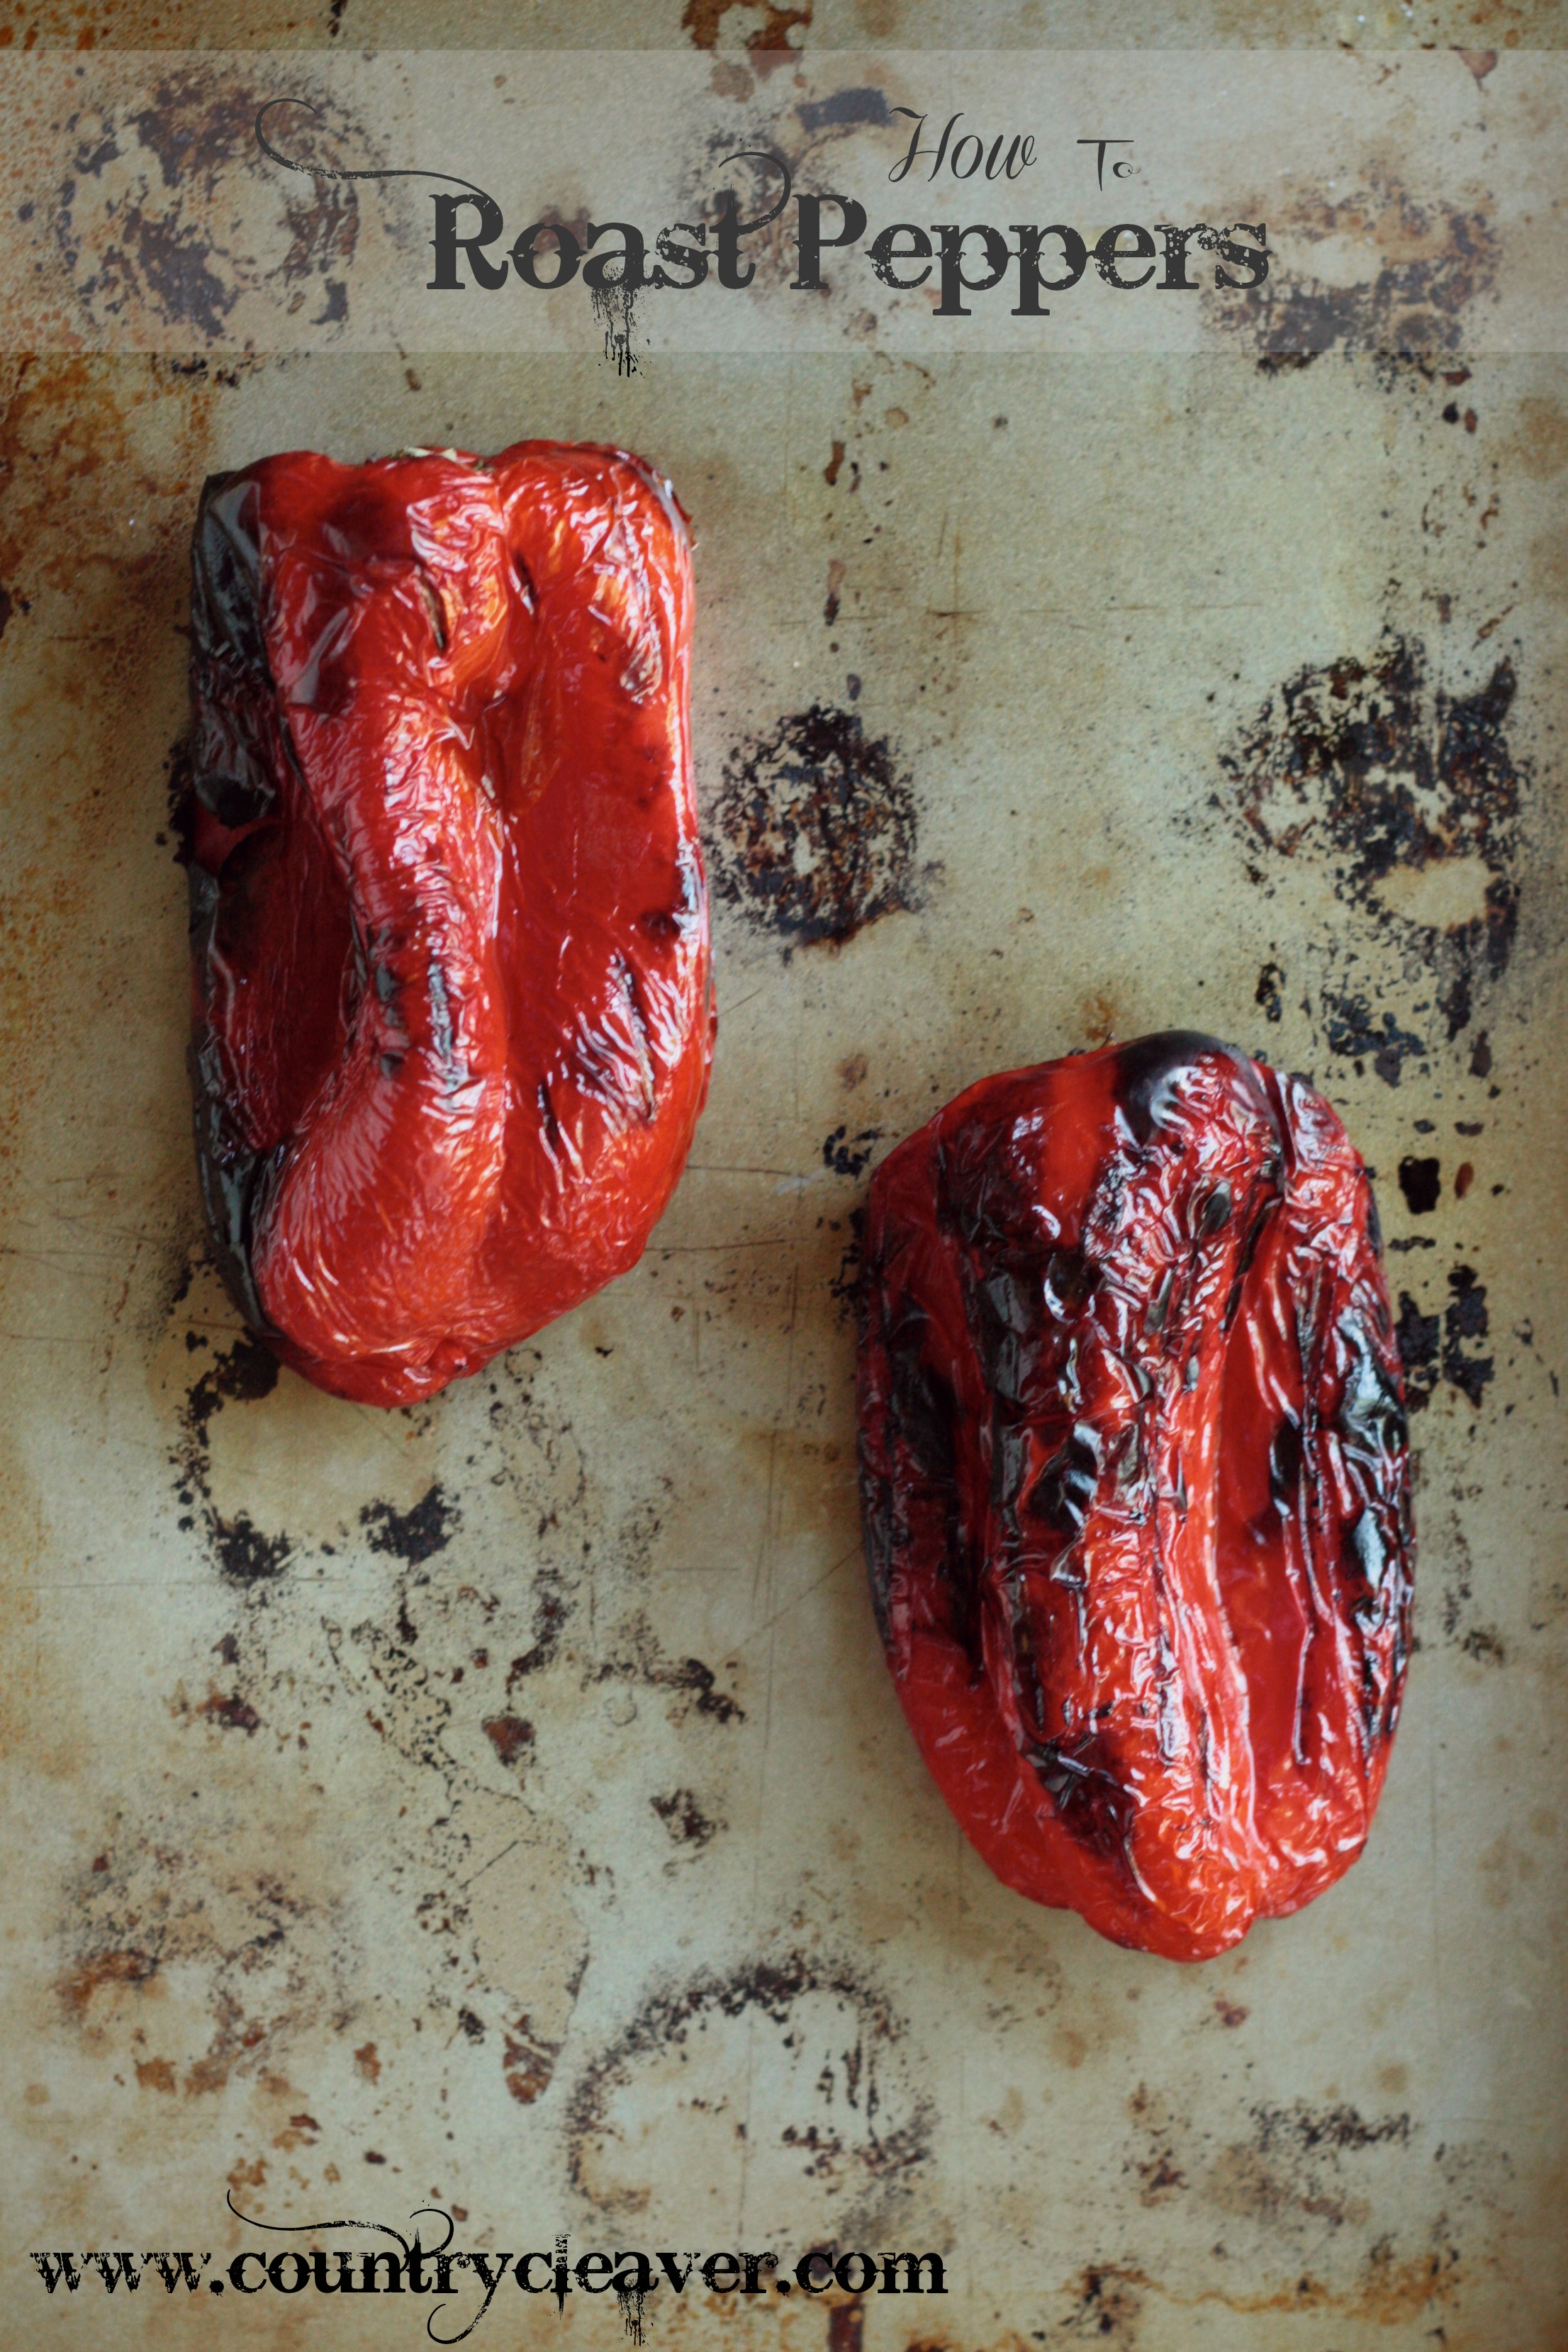 How To Roast Peppers - www.countrycleaver.com